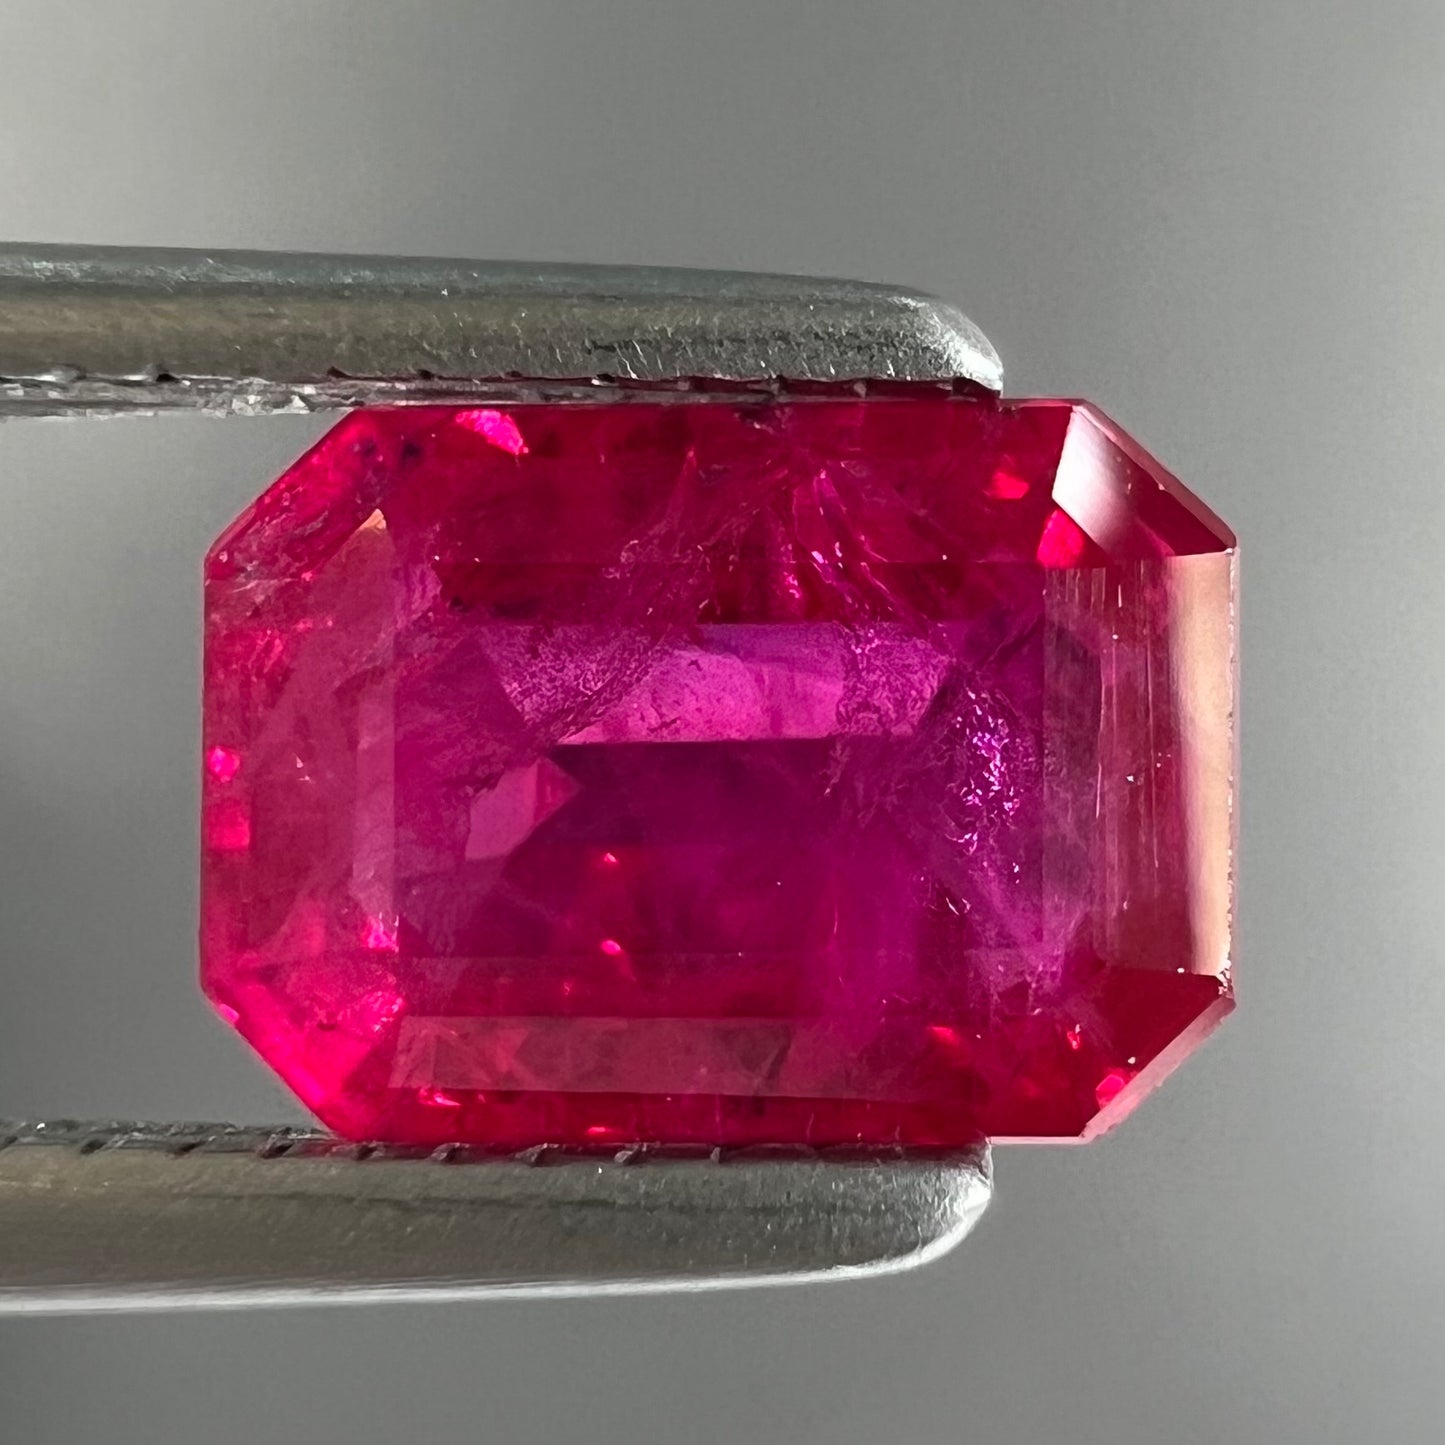 An emerald cut Burma ruby gemstone.  The stone is loose and a pinkish red color.